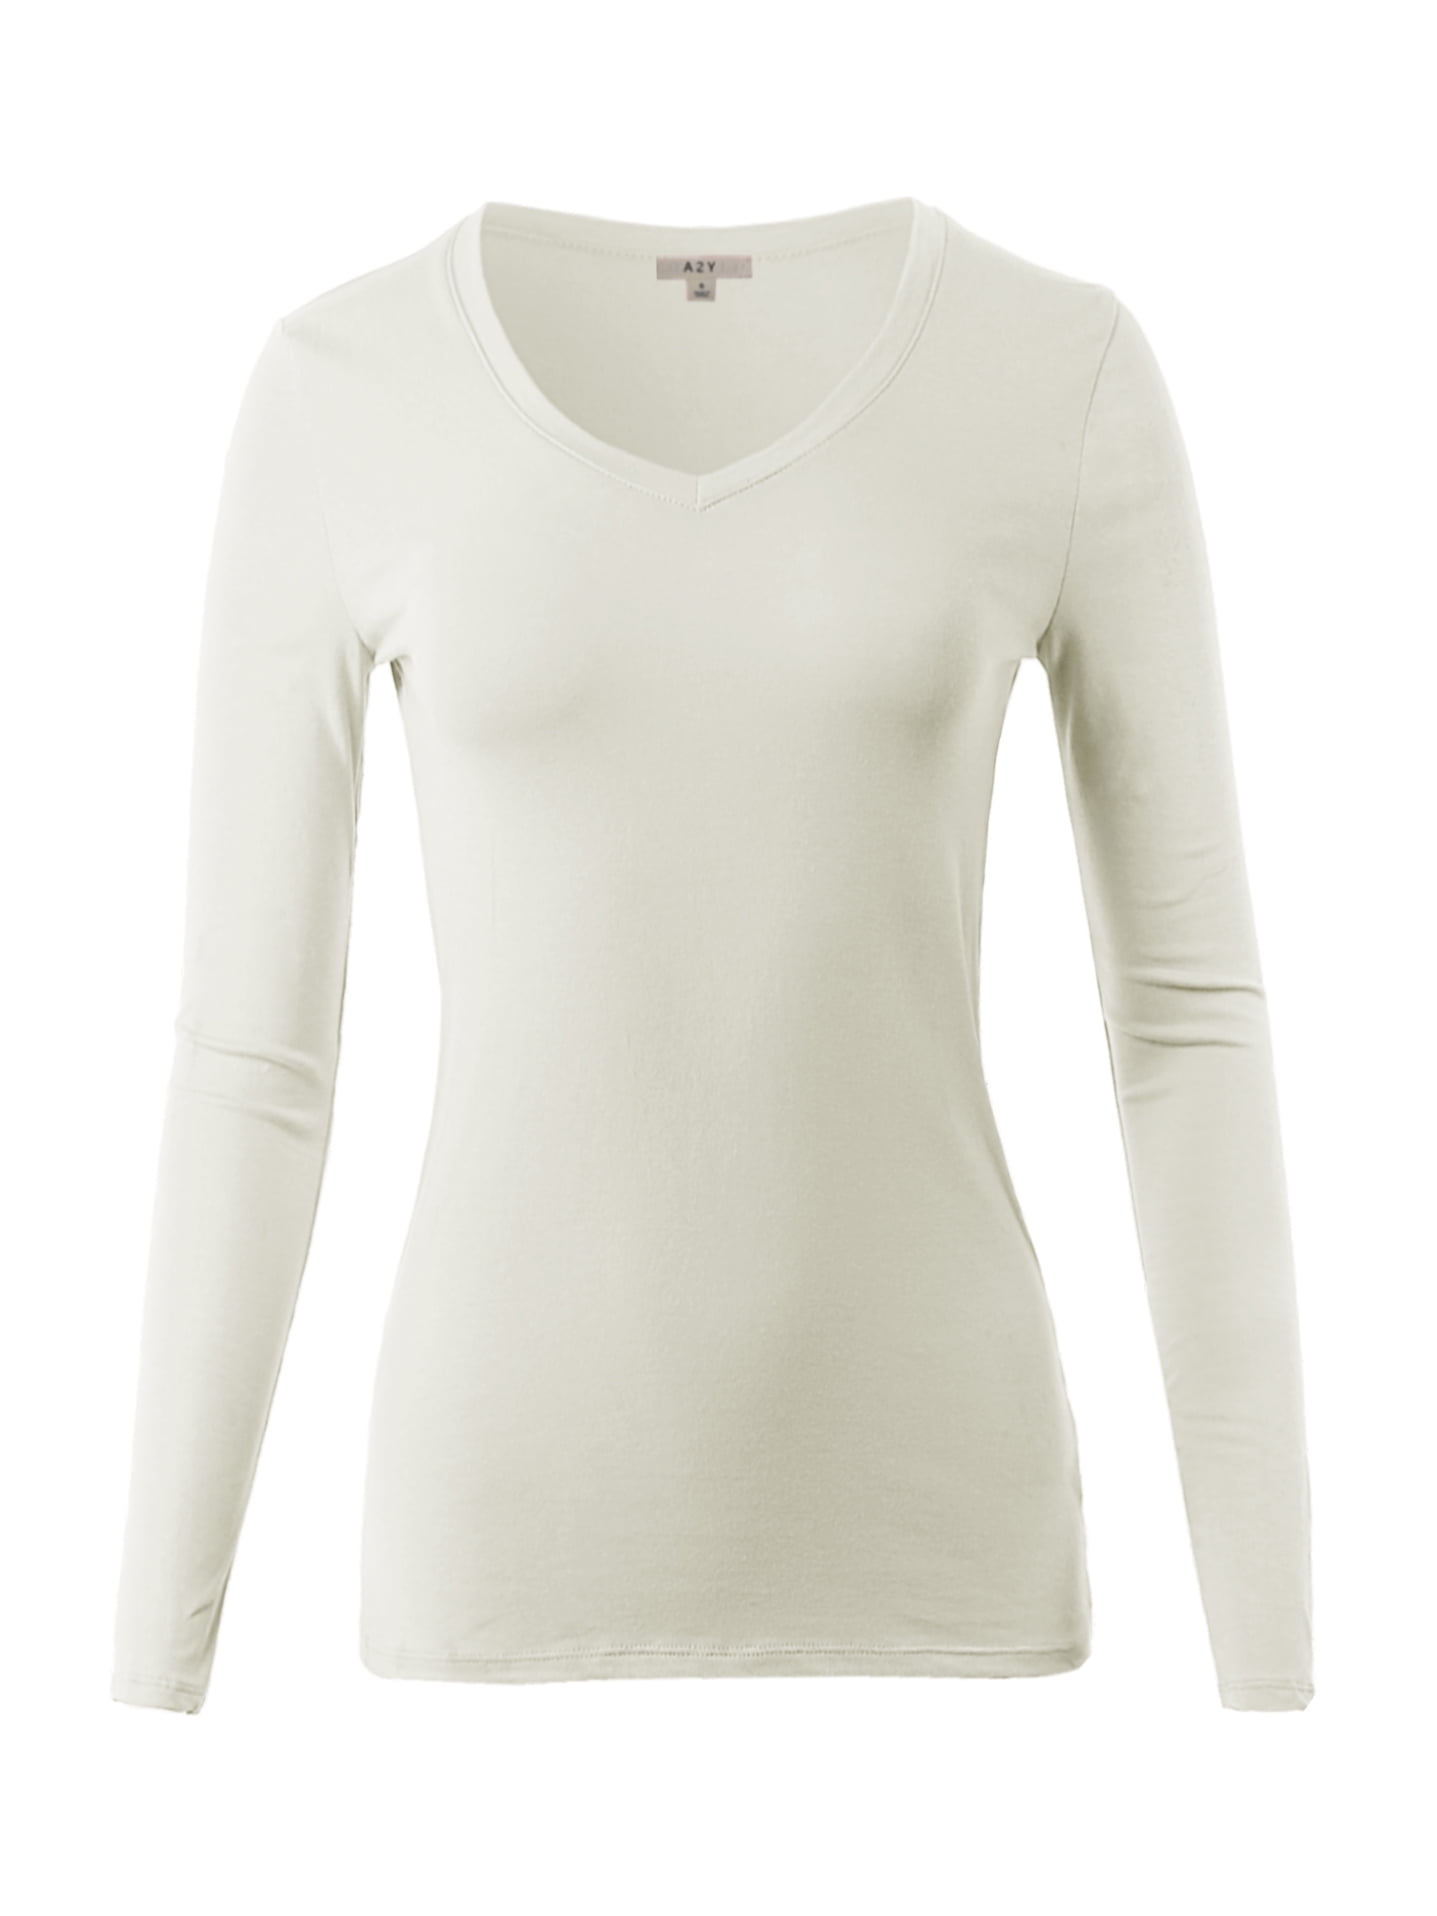 A2Y Women's Junior Slim Fit Basic Solid Cotton Long Sleeve V-neck Top ...